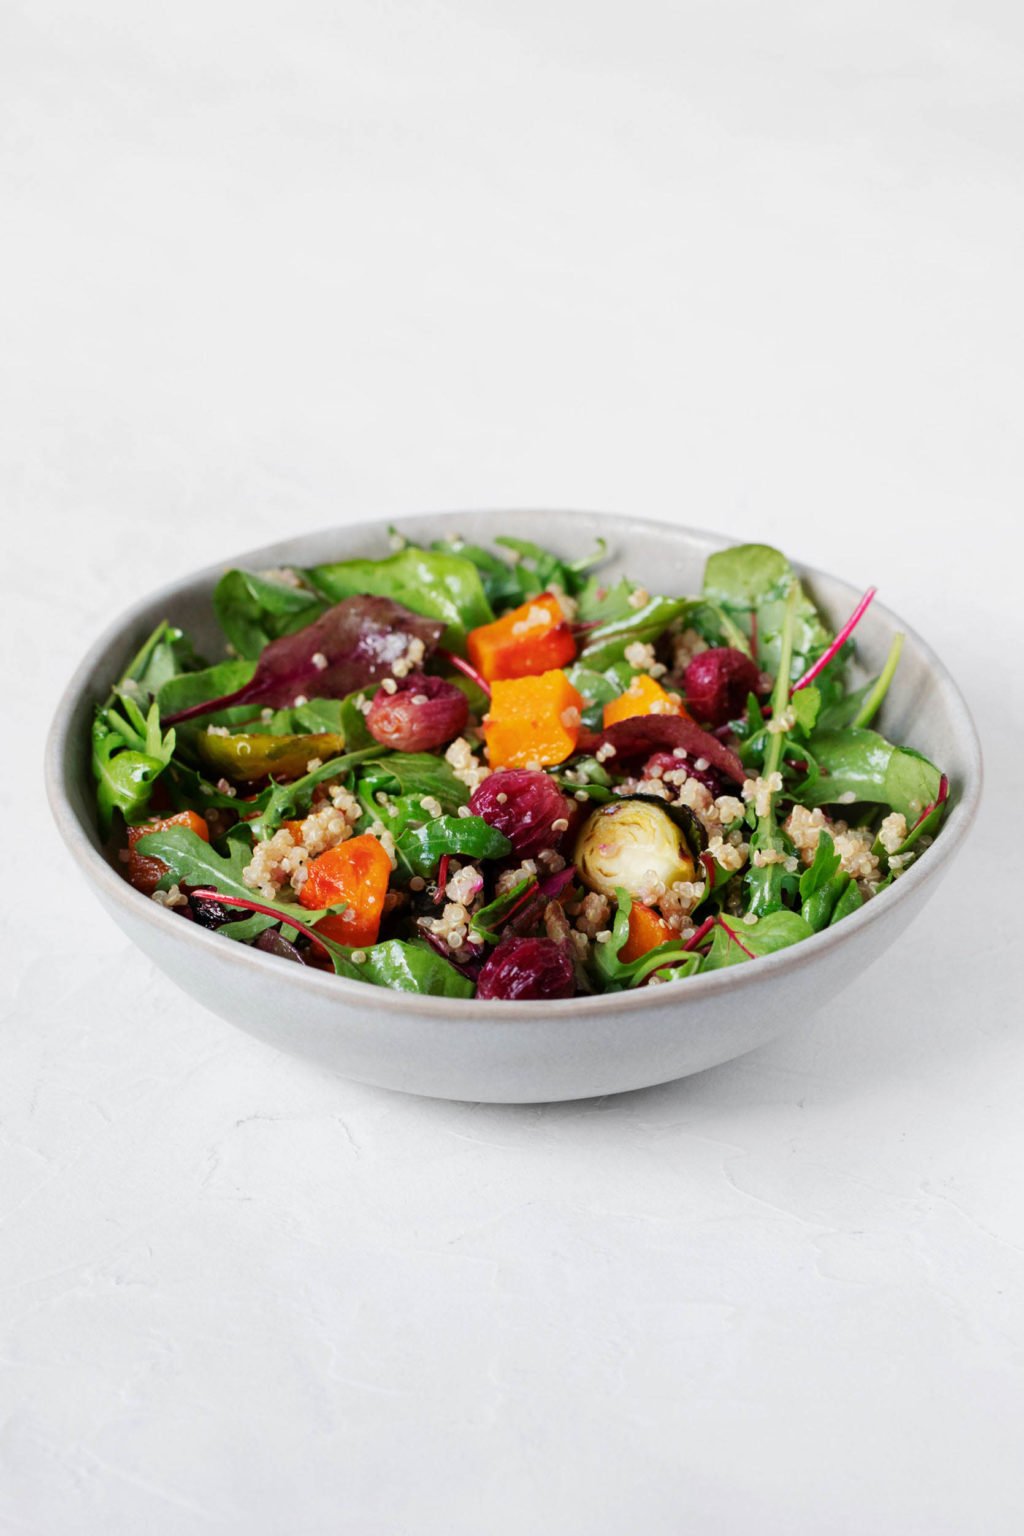 A white, round bowl is resting on a white surface. The bowl is filled with baby greens, cooked winter vegetables, whole grains, and a dressing.